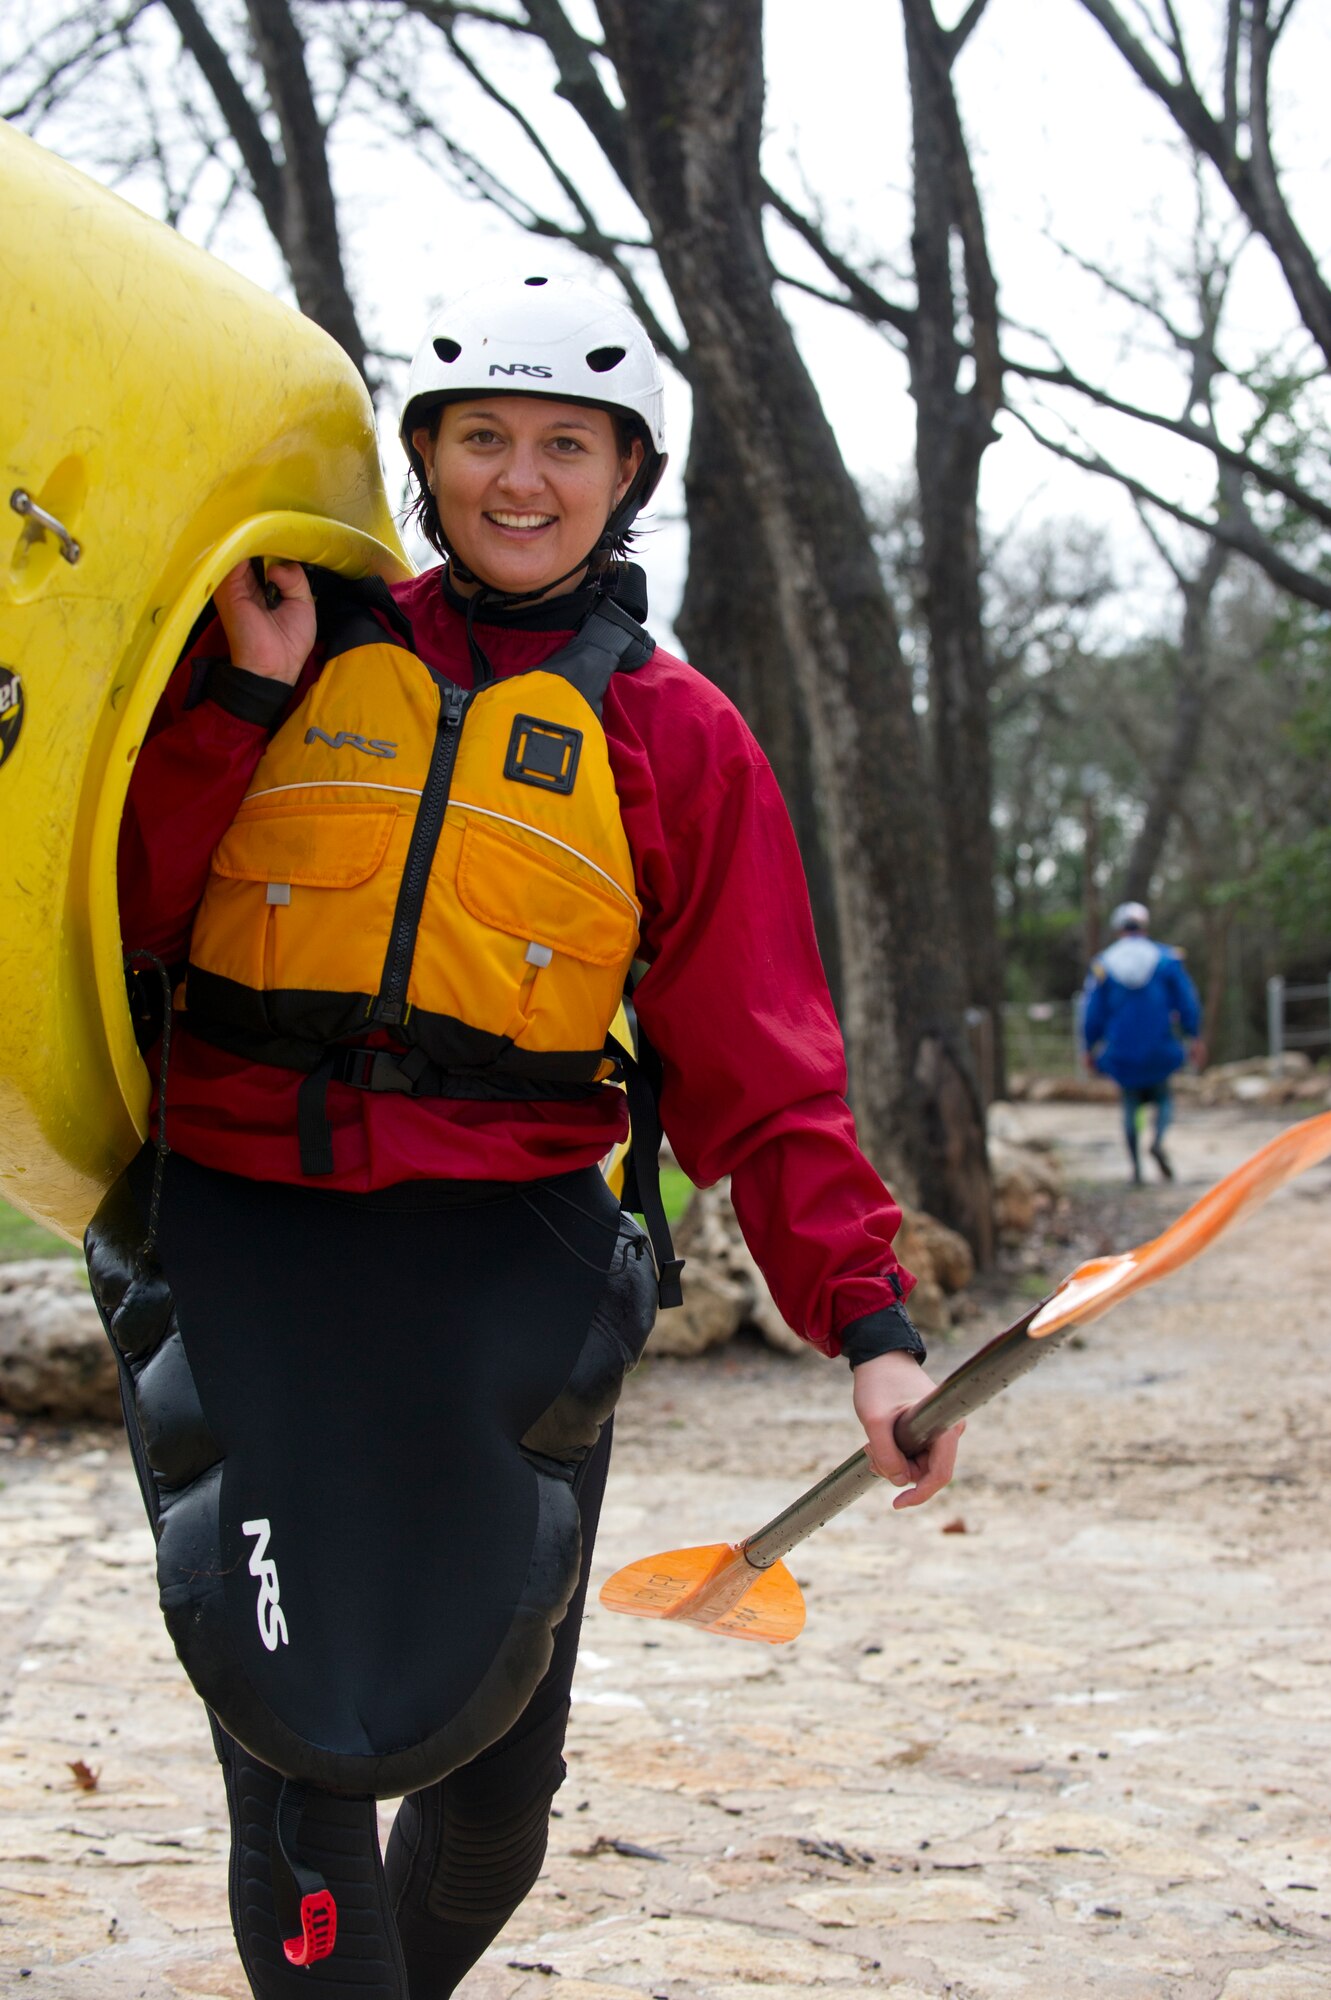 SAN MARCOS, Texas –- U.S. Air Force Staff Sgt. Jennifer Pemp, physical therapist with the 49th Medical Operations Squadron, carries her kayak out of the San Marcos River after a day of instruction and kayaking Feb. 19. Airmen a spouse and a civilian participating in the Holloman Outdoor Wingman Program came to San Marcos to gain a basic understanding of the principles of kayaking and to learn to apply the same critical thinking skills to everyday life. Each Airman, spouse and civilian walked away with a better understanding of both how to manage themselves on a white-water rapid and how to cope through the stress of work in a healthy way. (U.S. Air Force photo by Airman 1st Class Daniel E. Liddicoet/Released)